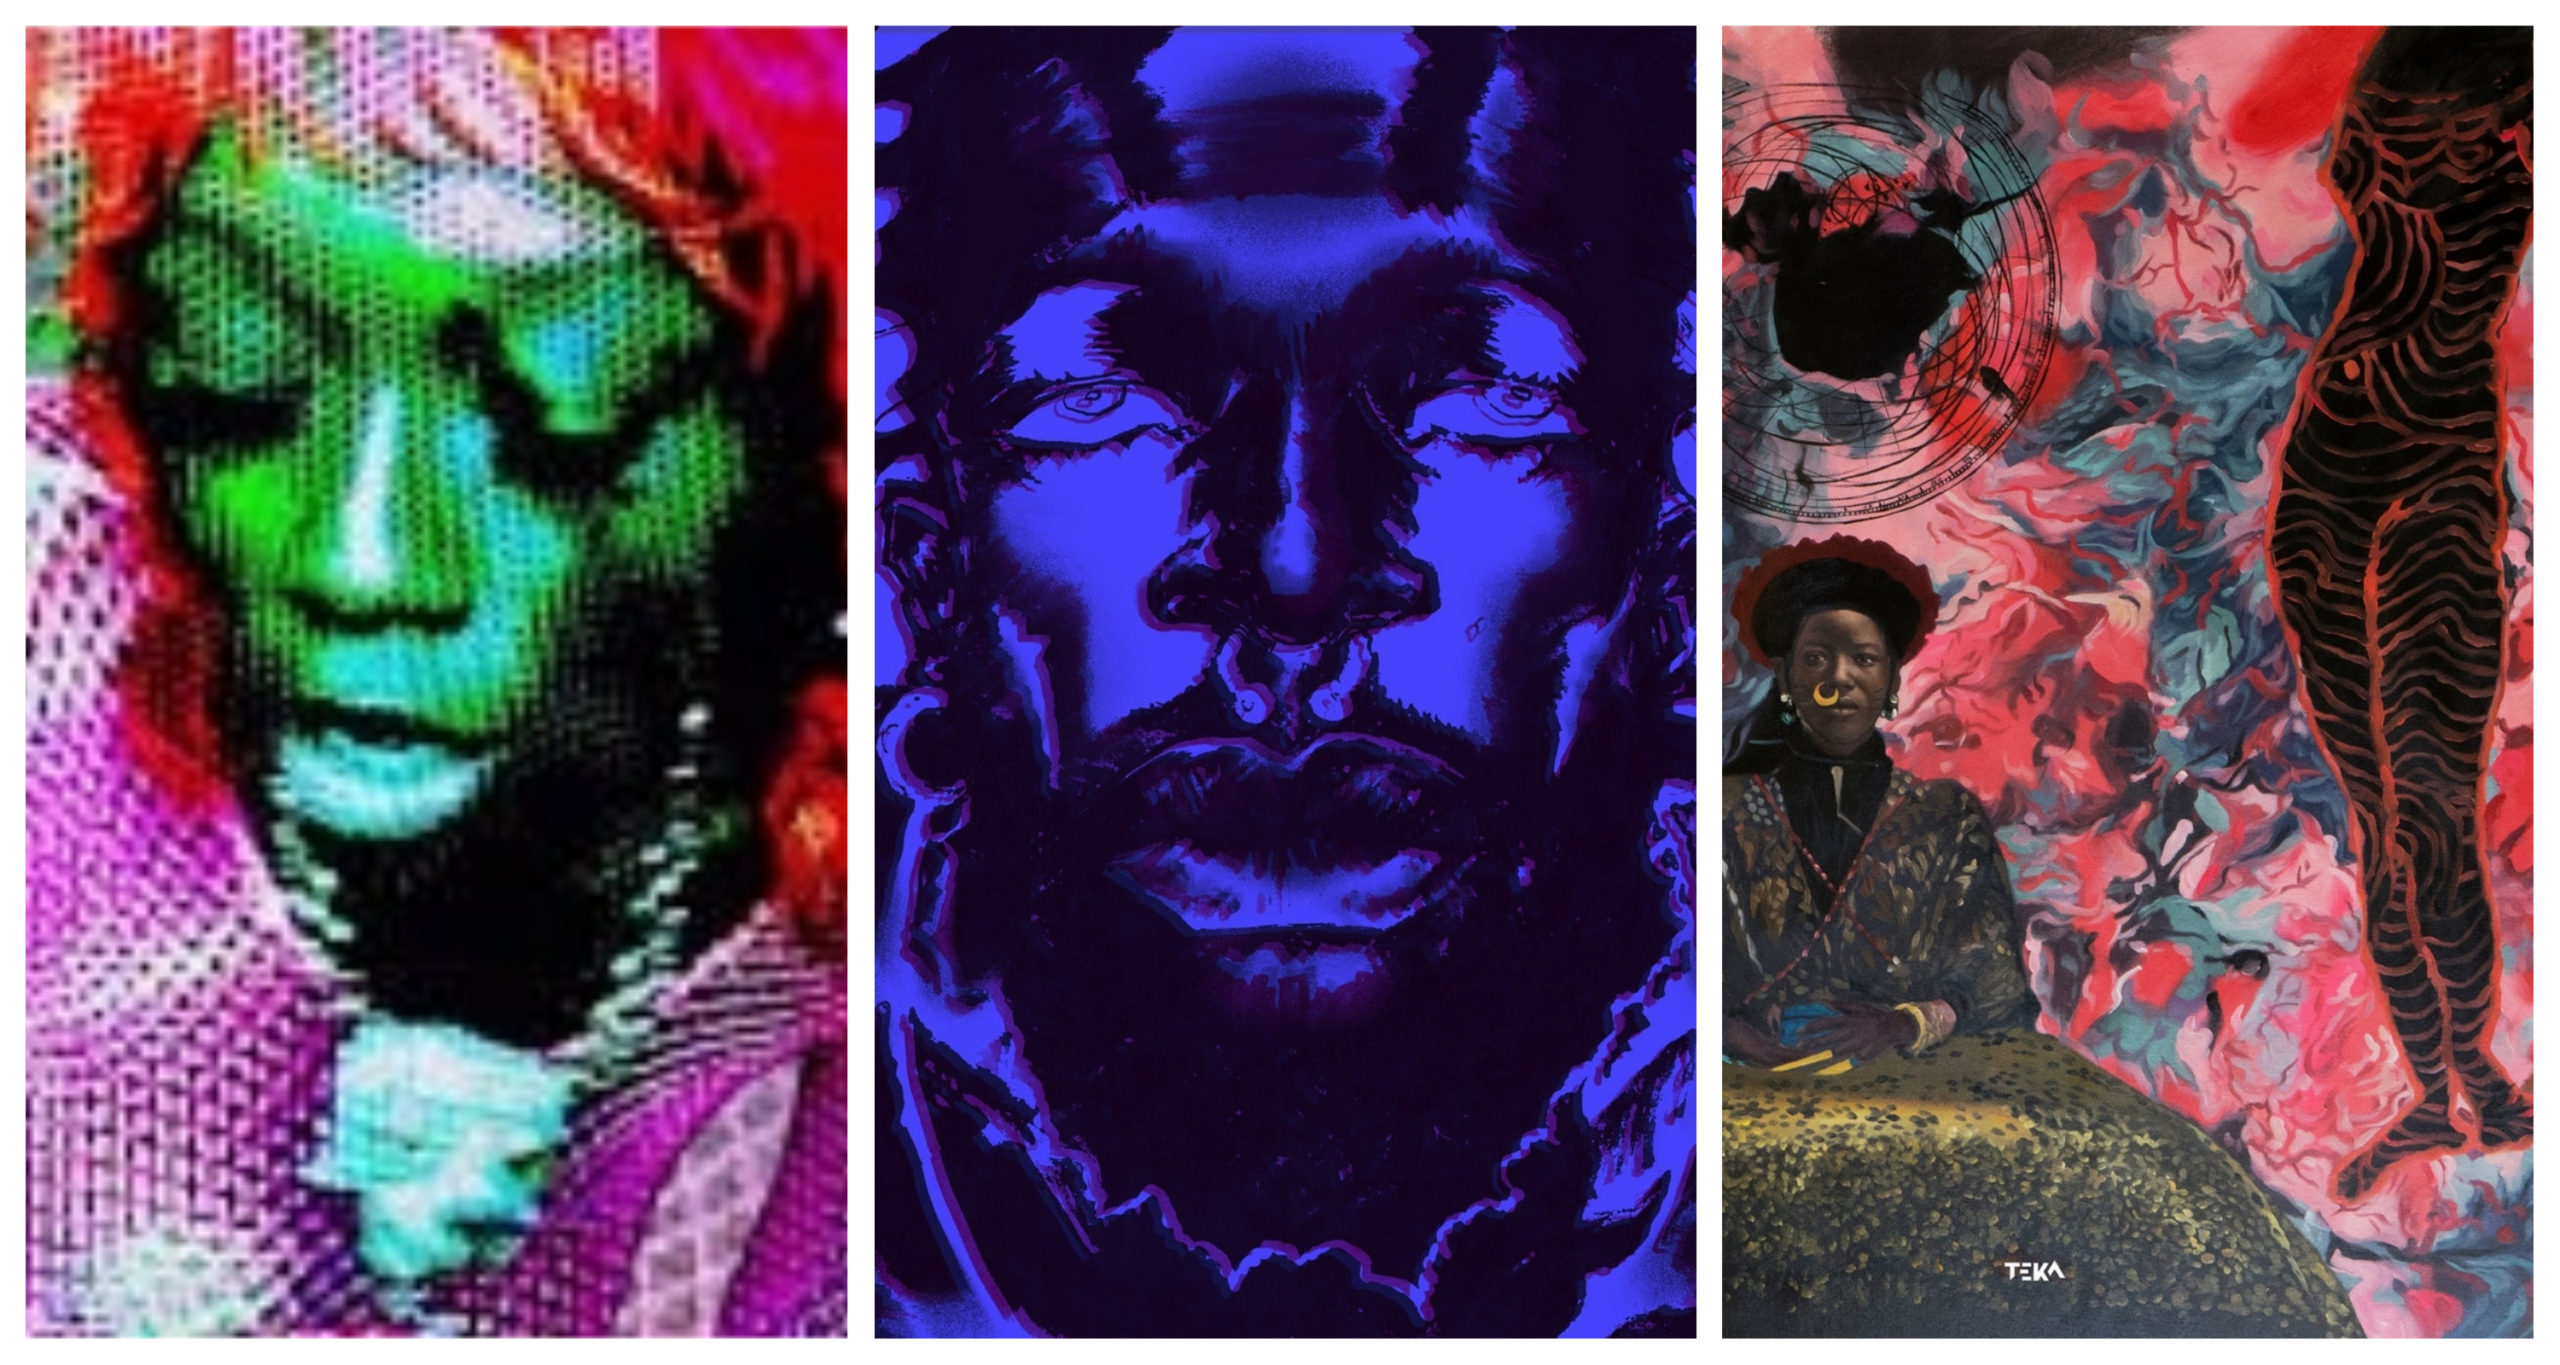 Black Artists to support on Bandcamp Friday, 11/6